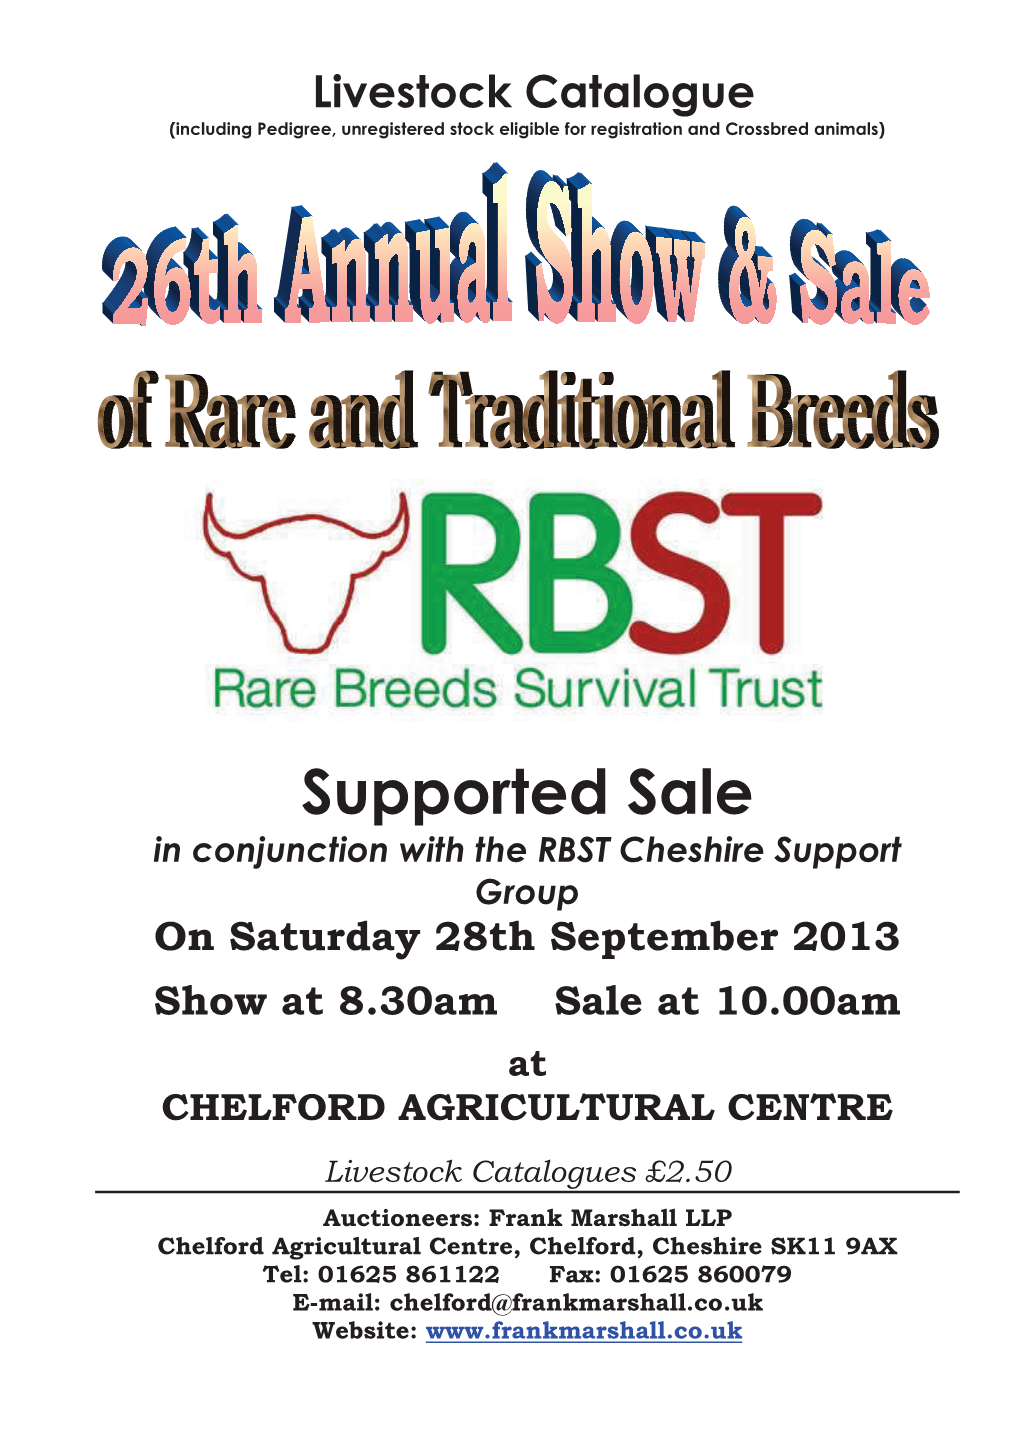 Supported Sale in Conjunction with the RBST Cheshire Support Group on Saturday 28Th September 2013